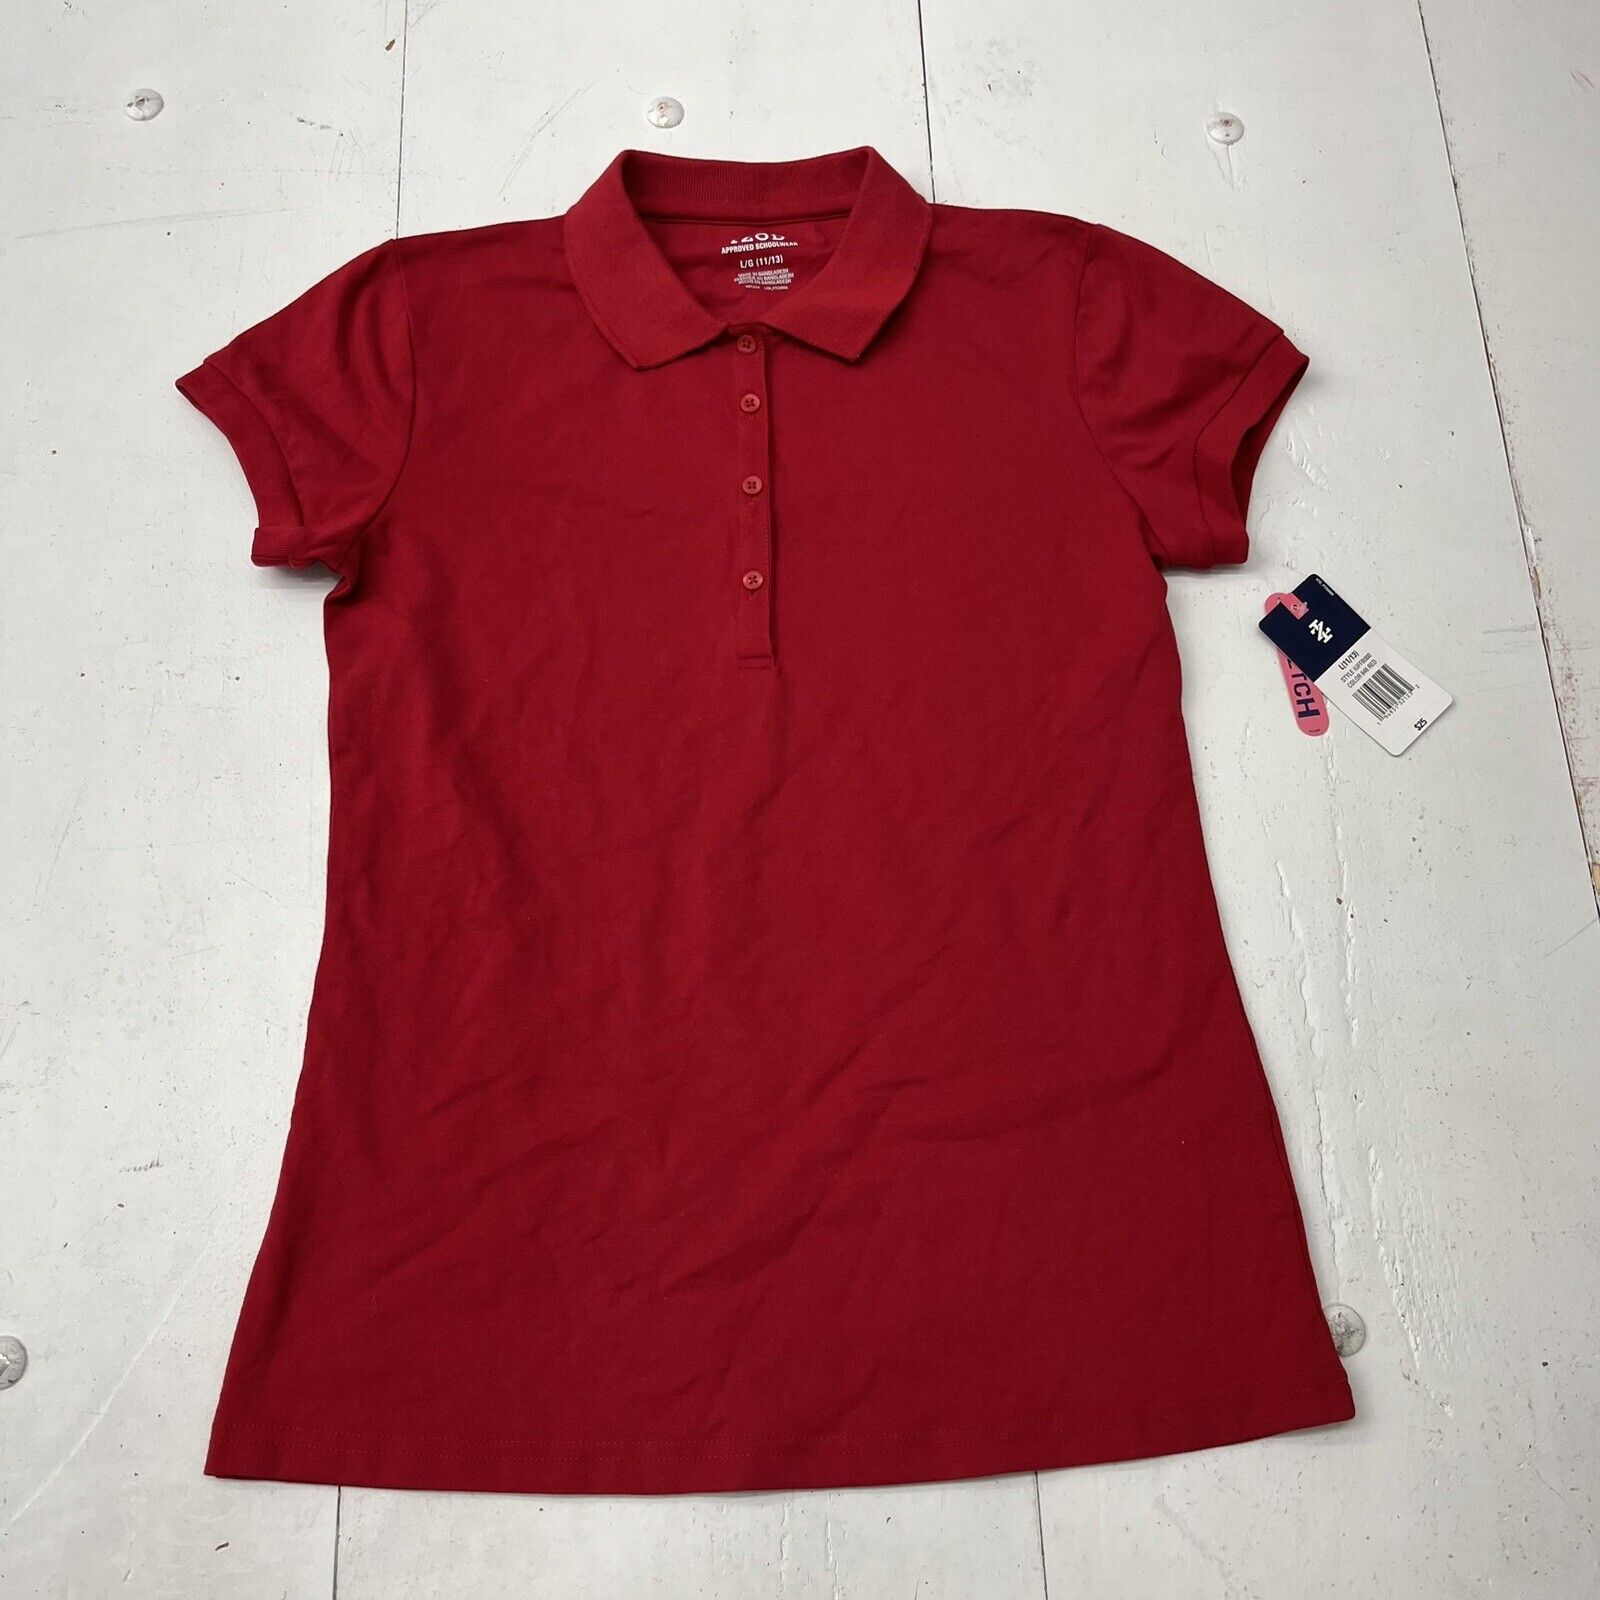 Izod Red Approved Schoolwear Short Sleeve Polo Girls Size Large NEW